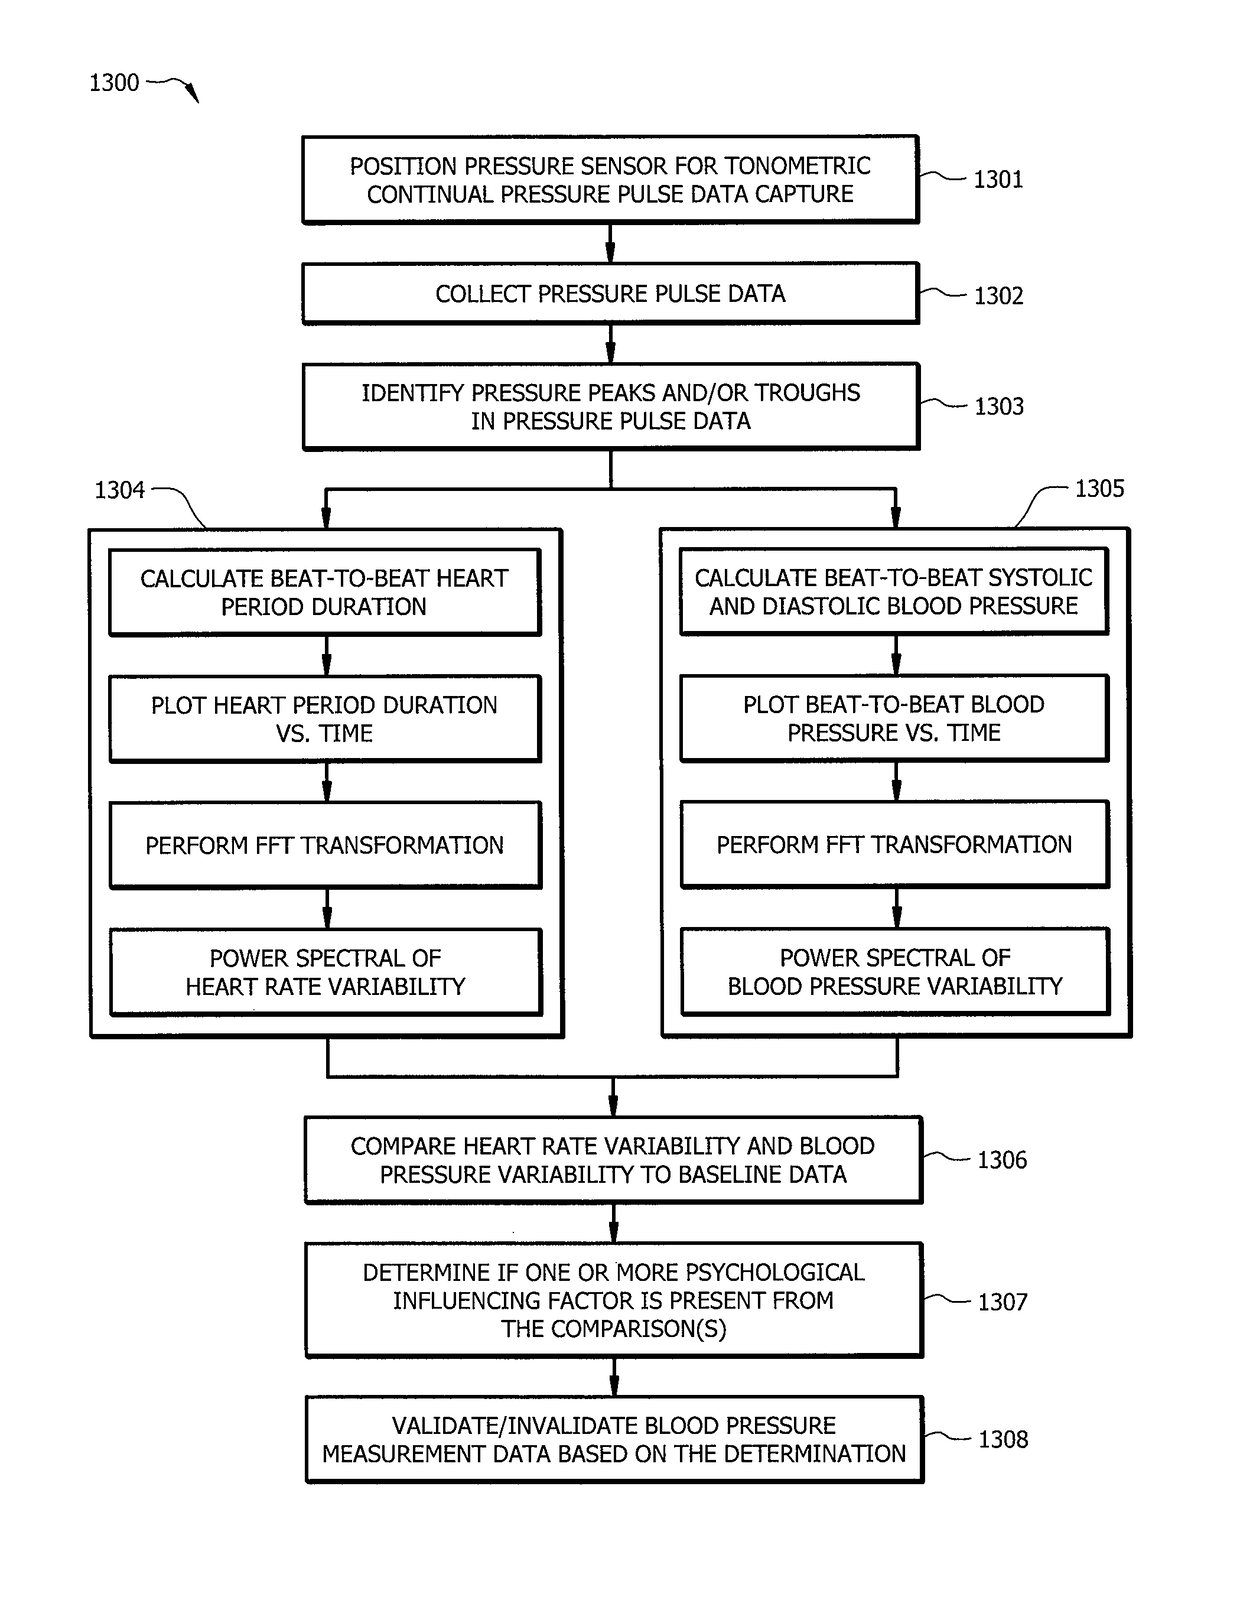 Systems and methods for blood pressure measurement with psychological status validation